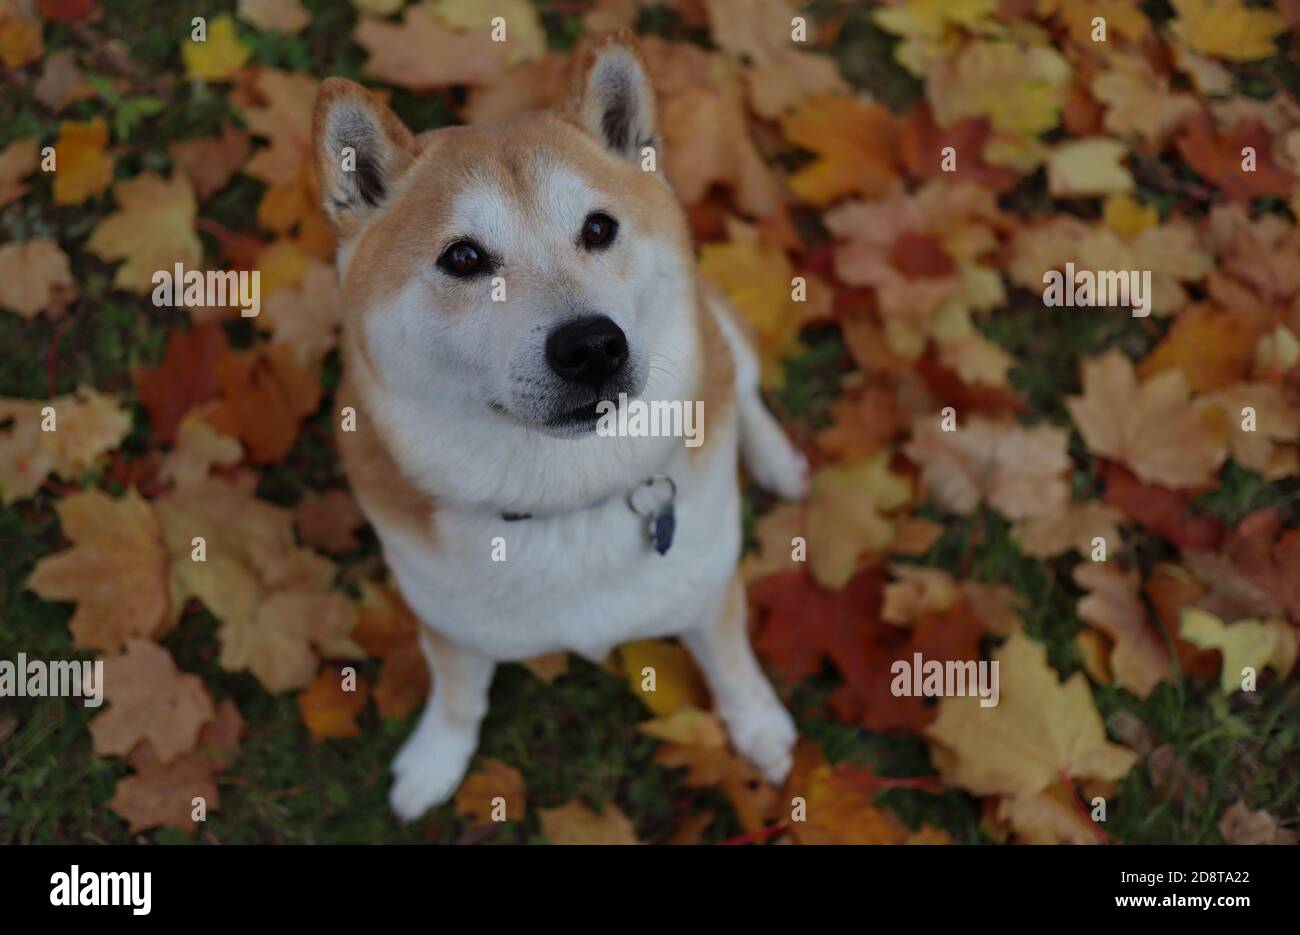 Top-Down Shiba with Innocent Look Sits on Colorful Fallen Autumn Leaves during Fall Season. The Shiba Inu is a Japanese Breed. Stock Photo